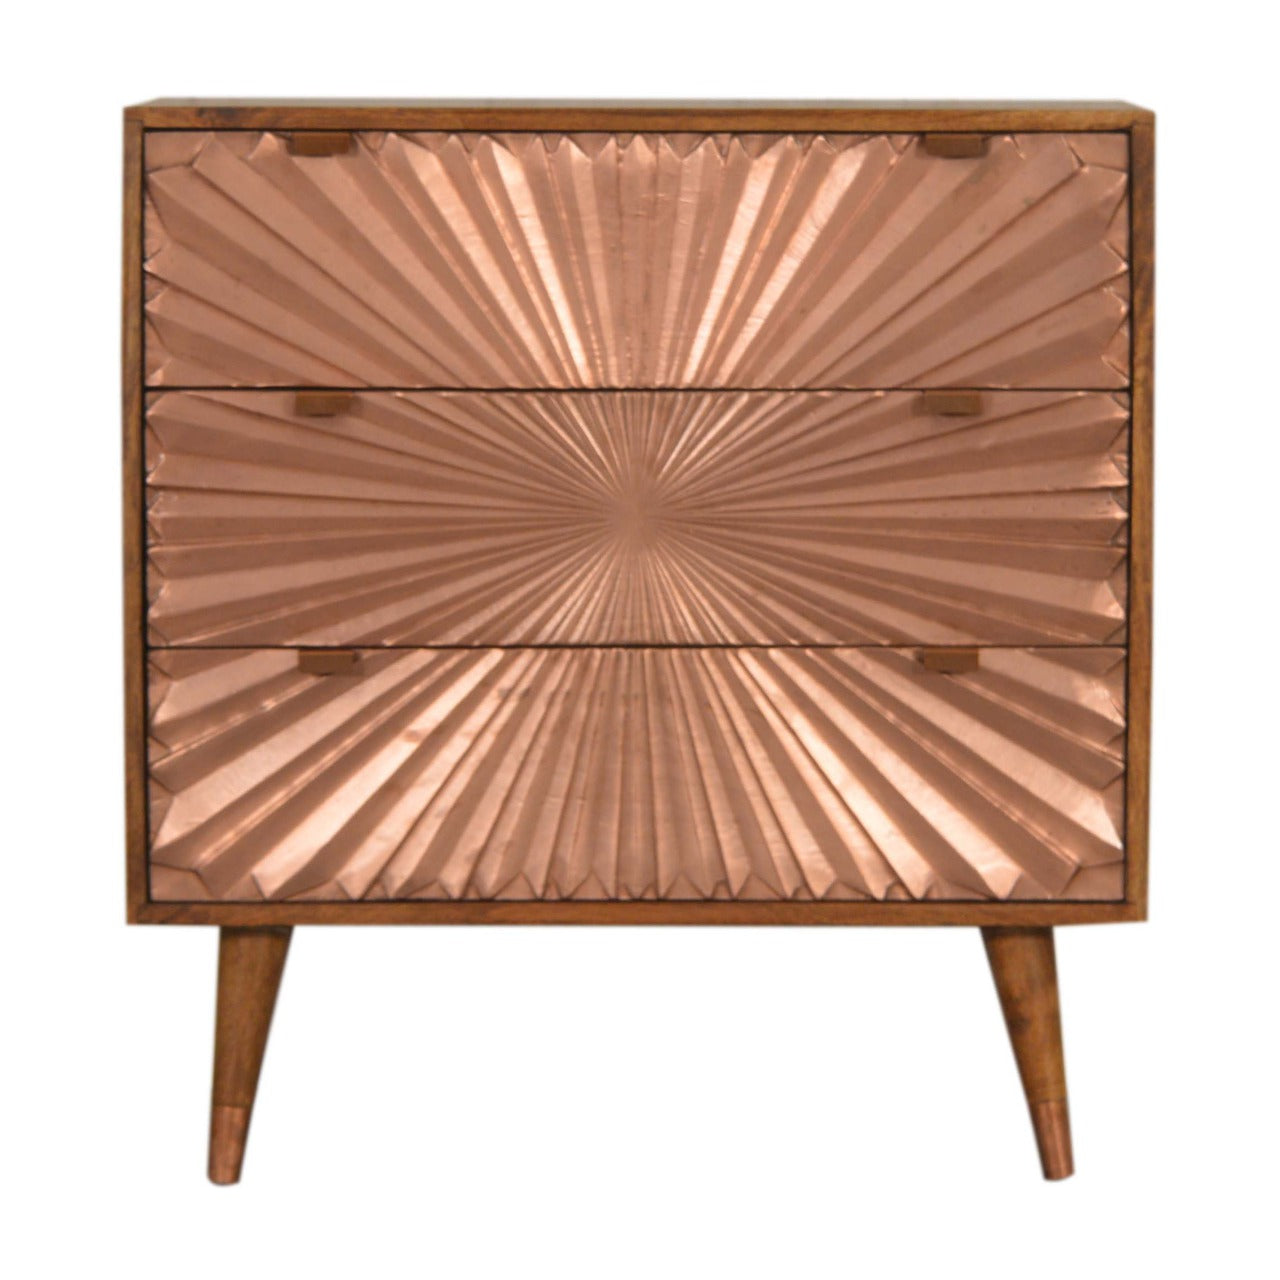 Solid Wood Manila Copper Chest